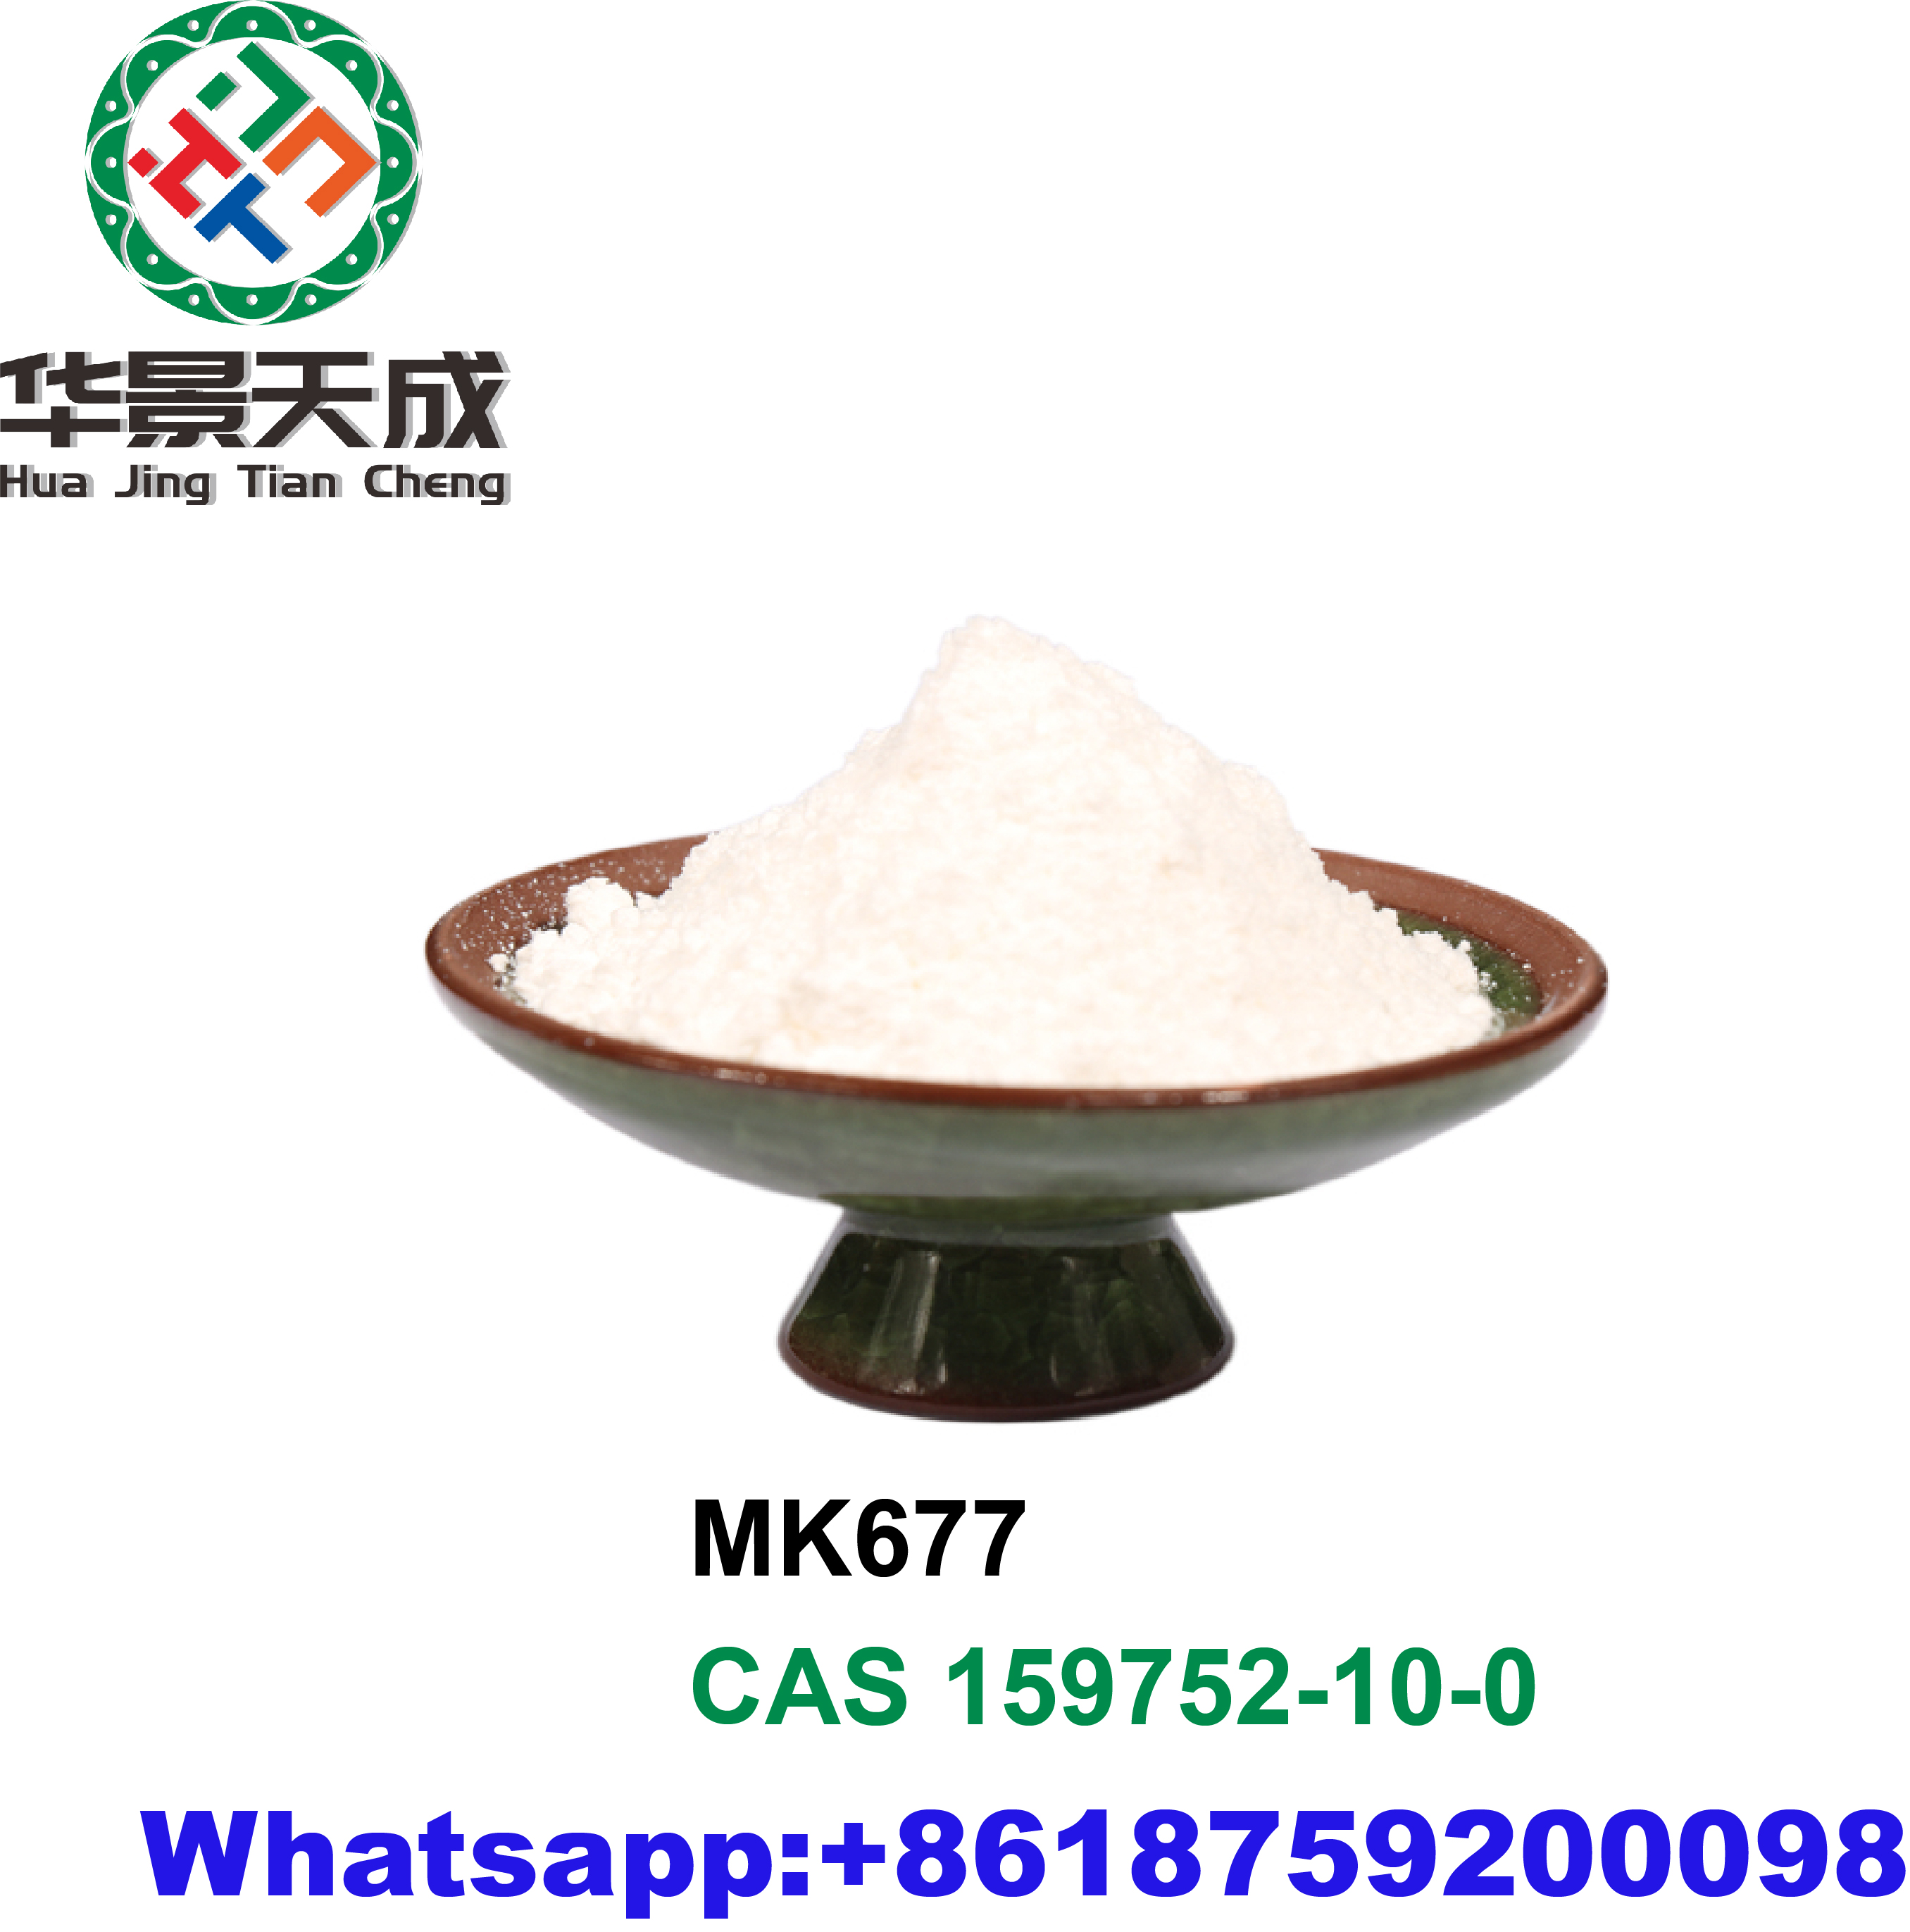 Contact Now Mk677 Hot Selling Best Quality 99% Ibutamoren Sarms Raw Material Powder Featured Image